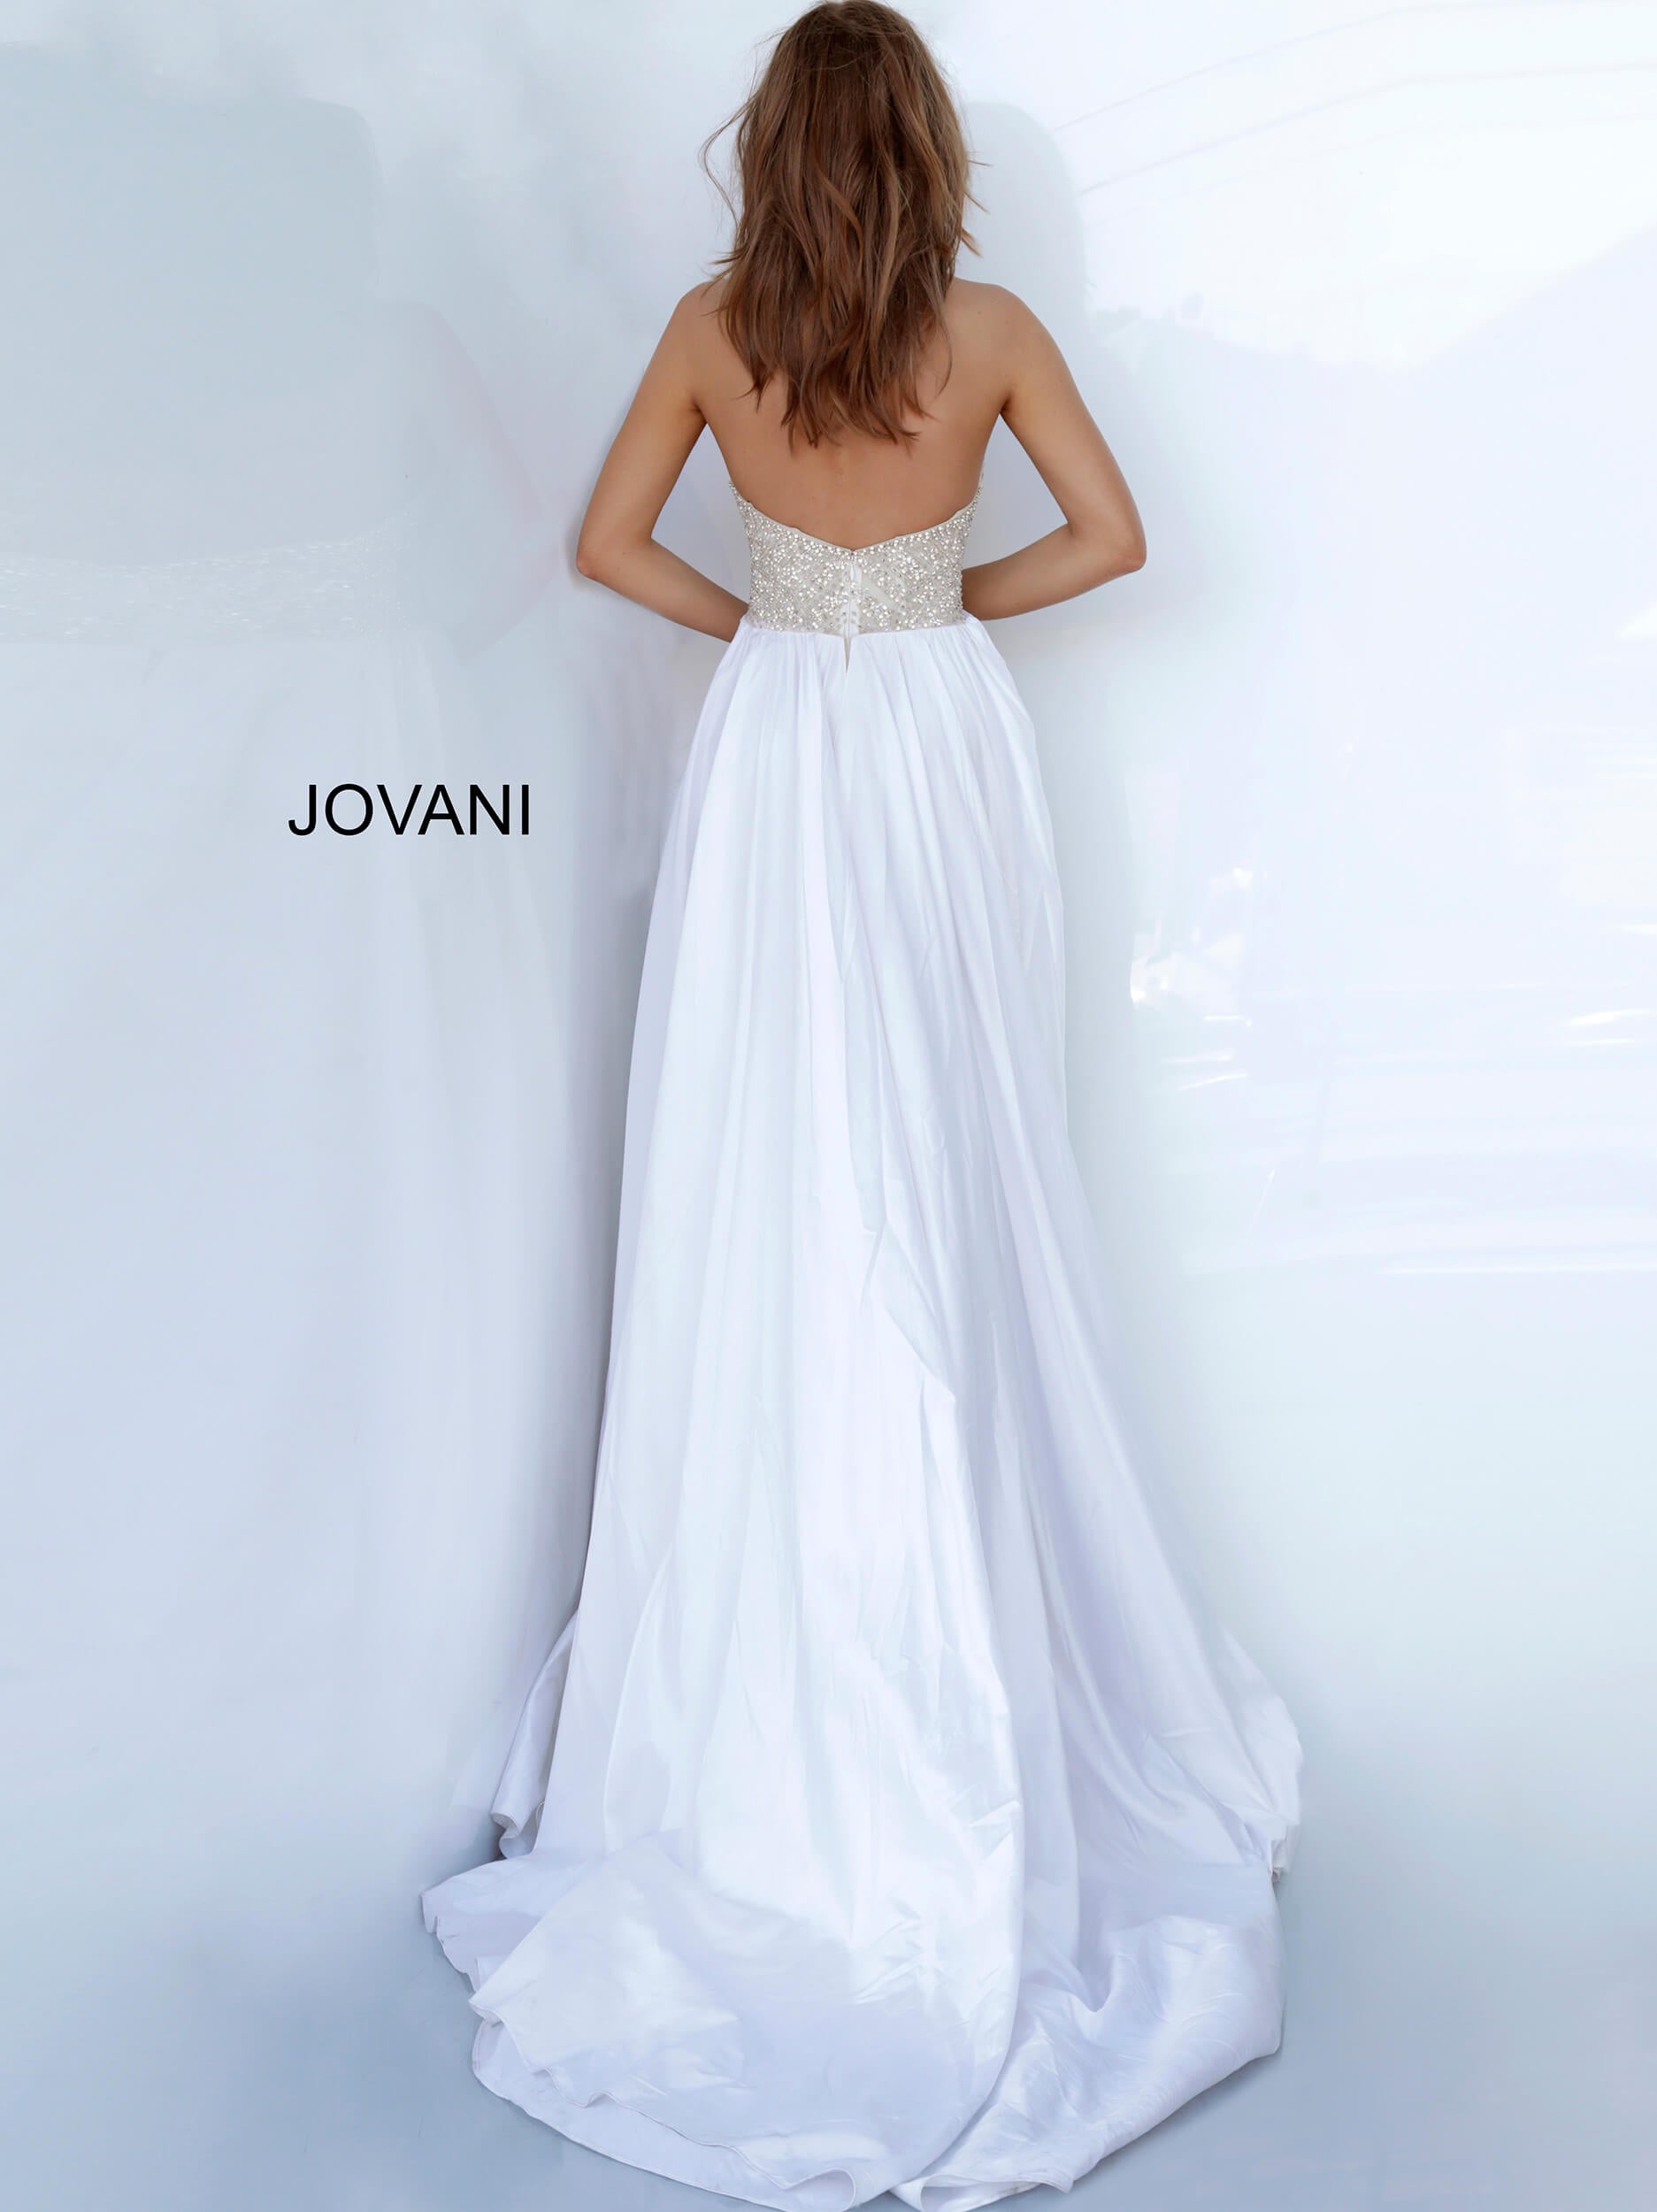 Jovani Couture 3698 Long Crystal Beaded Pageant Dress Wedding Gown Overskirt Plunging Neckline Glass Slipper Formals Over Skirt